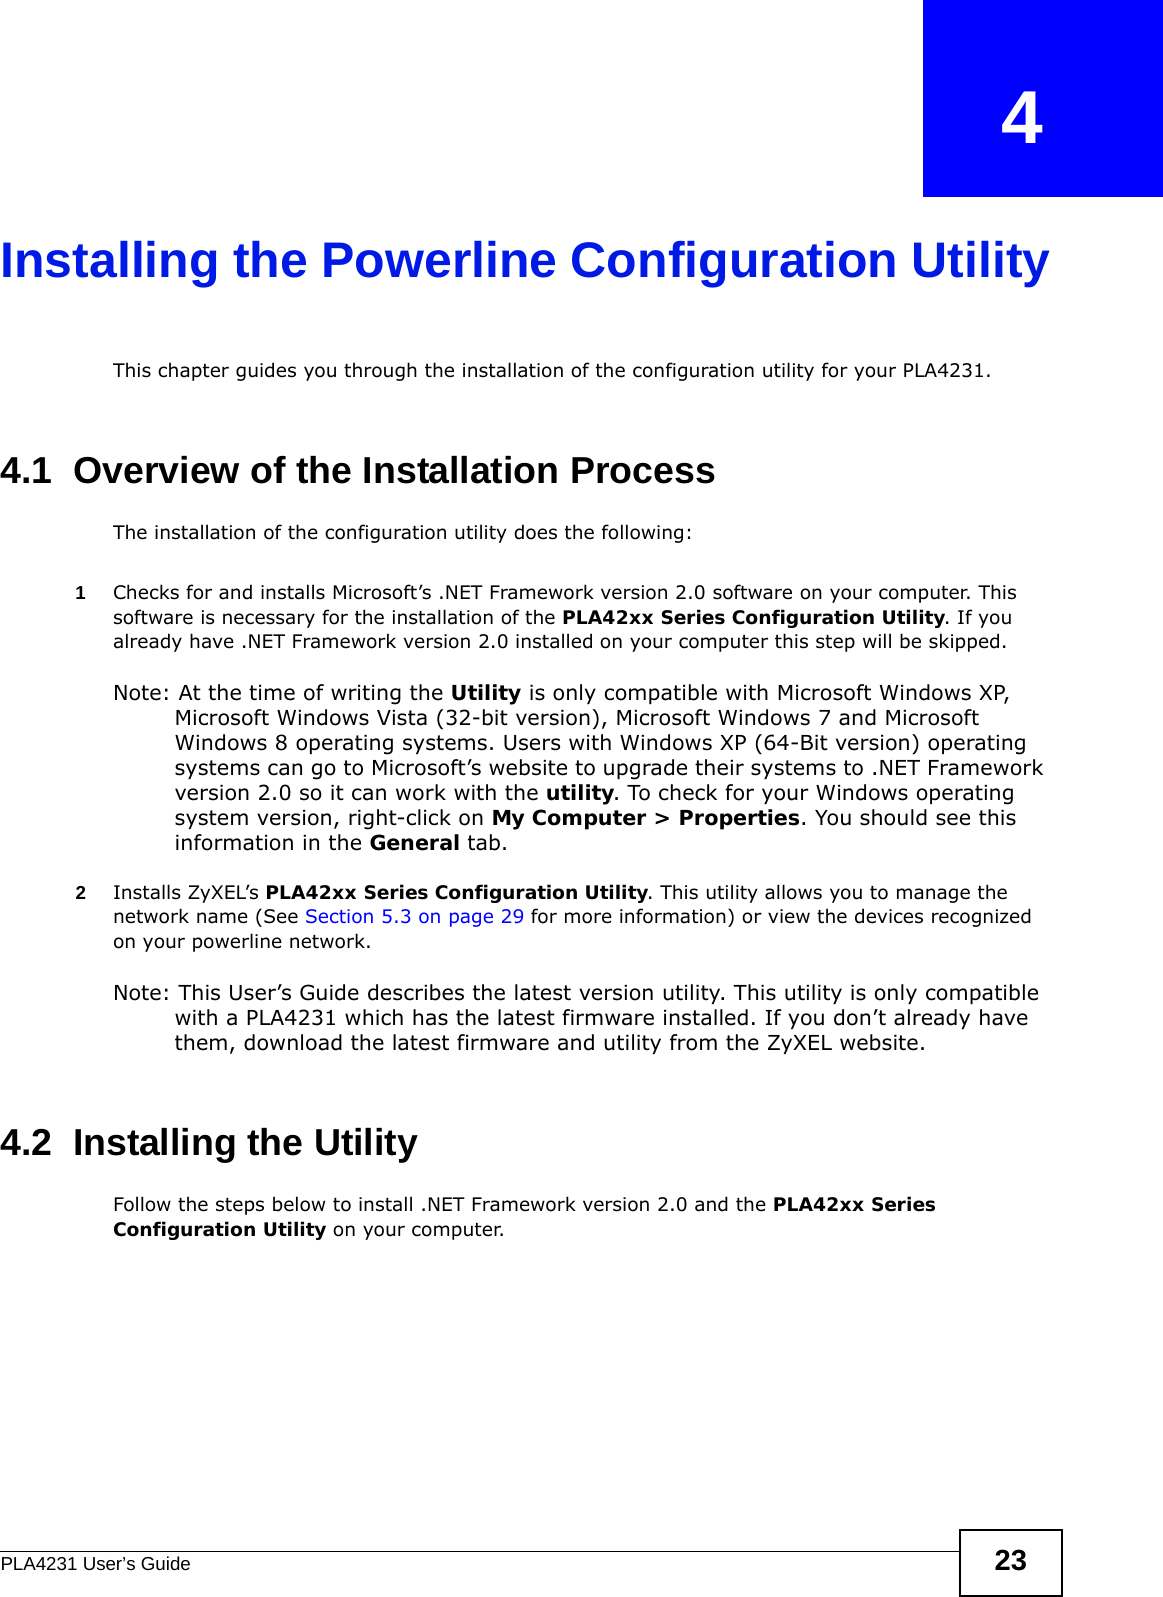 PLA4231 User’s Guide 23CHAPTER   4Installing the Powerline Configuration UtilityThis chapter guides you through the installation of the configuration utility for your PLA4231.4.1  Overview of the Installation ProcessThe installation of the configuration utility does the following:1Checks for and installs Microsoft’s .NET Framework version 2.0 software on your computer. This software is necessary for the installation of the PLA42xx Series Configuration Utility. If you already have .NET Framework version 2.0 installed on your computer this step will be skipped.Note: At the time of writing the Utility is only compatible with Microsoft Windows XP, Microsoft Windows Vista (32-bit version), Microsoft Windows 7 and Microsoft Windows 8 operating systems. Users with Windows XP (64-Bit version) operating systems can go to Microsoft’s website to upgrade their systems to .NET Framework version 2.0 so it can work with the utility. To check for your Windows operating system version, right-click on My Computer &gt; Properties. You should see this information in the General tab.2Installs ZyXEL’s PLA42xx Series Configuration Utility. This utility allows you to manage the network name (See Section 5.3 on page 29 for more information) or view the devices recognized on your powerline network. Note: This User’s Guide describes the latest version utility. This utility is only compatible with a PLA4231 which has the latest firmware installed. If you don’t already have them, download the latest firmware and utility from the ZyXEL website.4.2  Installing the UtilityFollow the steps below to install .NET Framework version 2.0 and the PLA42xx Series Configuration Utility on your computer.